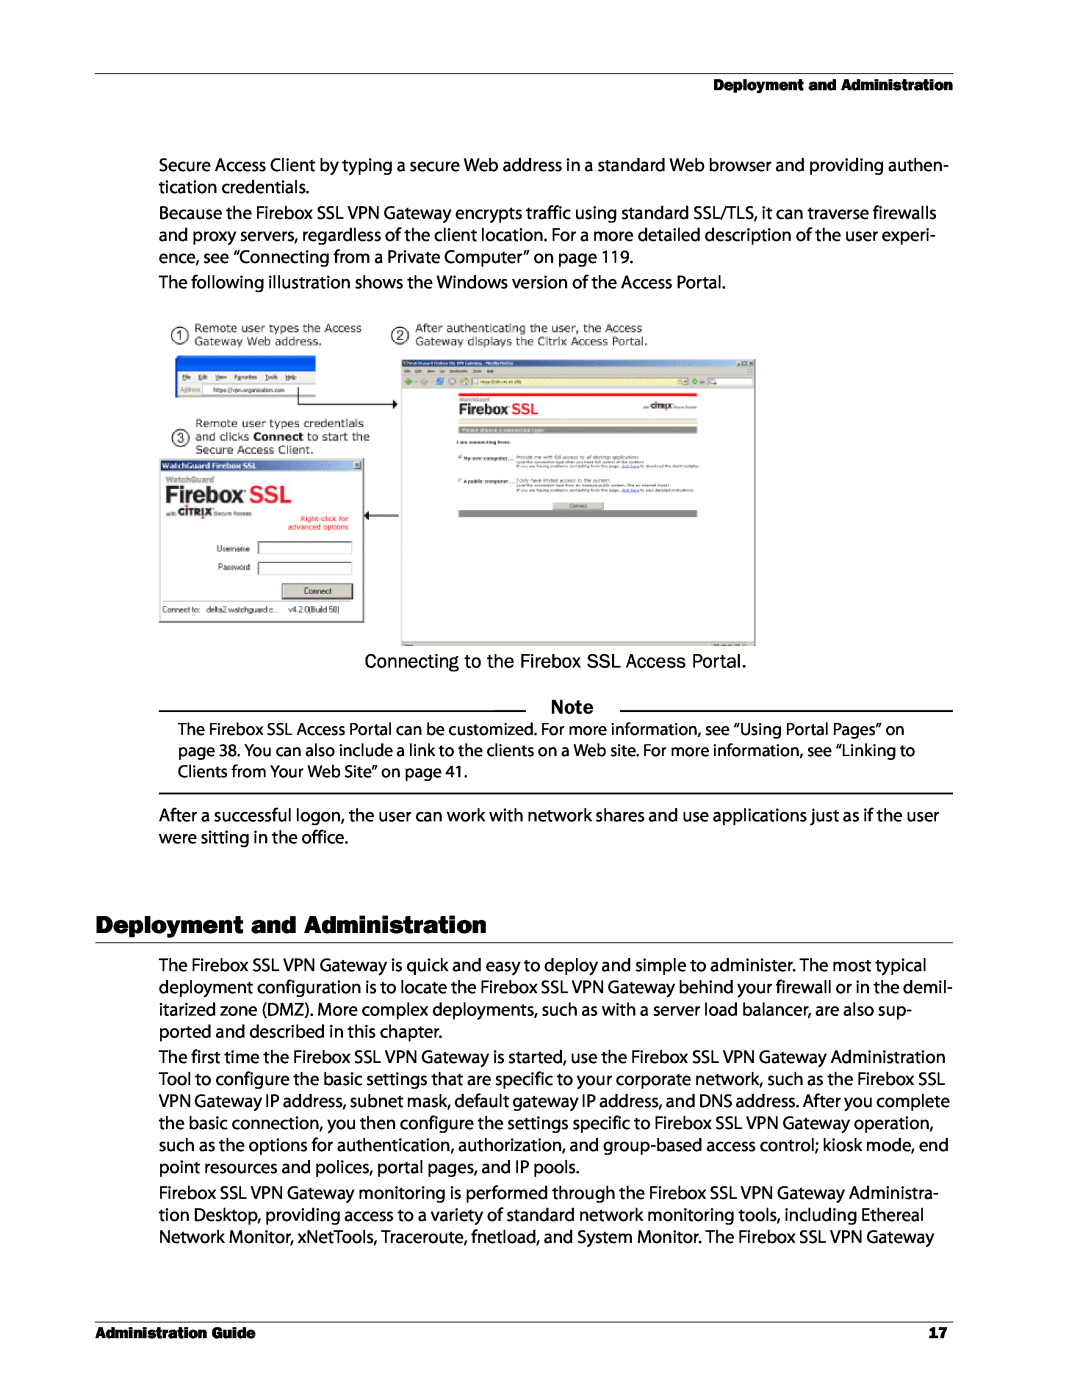 WatchGuard Technologies SSL VPN manual Deployment and Administration, Connecting to the Firebox SSL Access Portal 